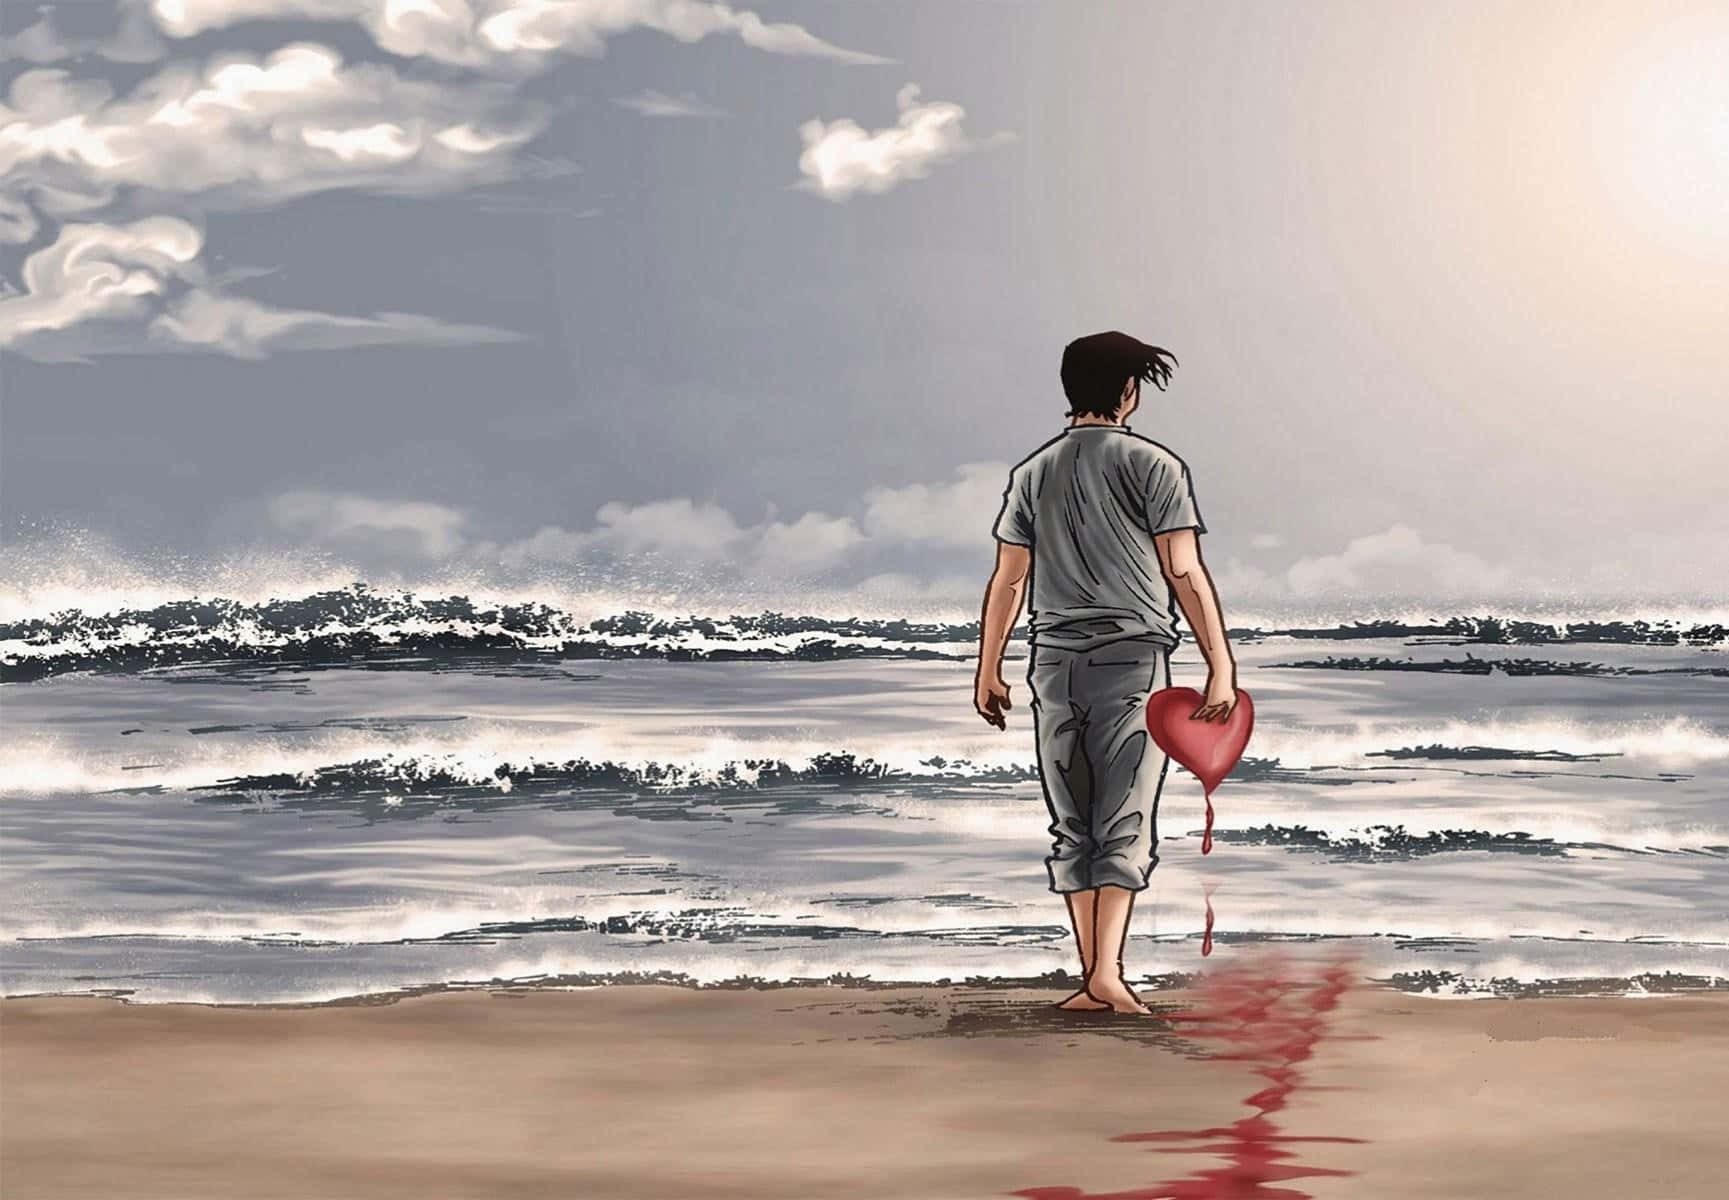 A Man Walking On The Beach With A Heart On His Shirt